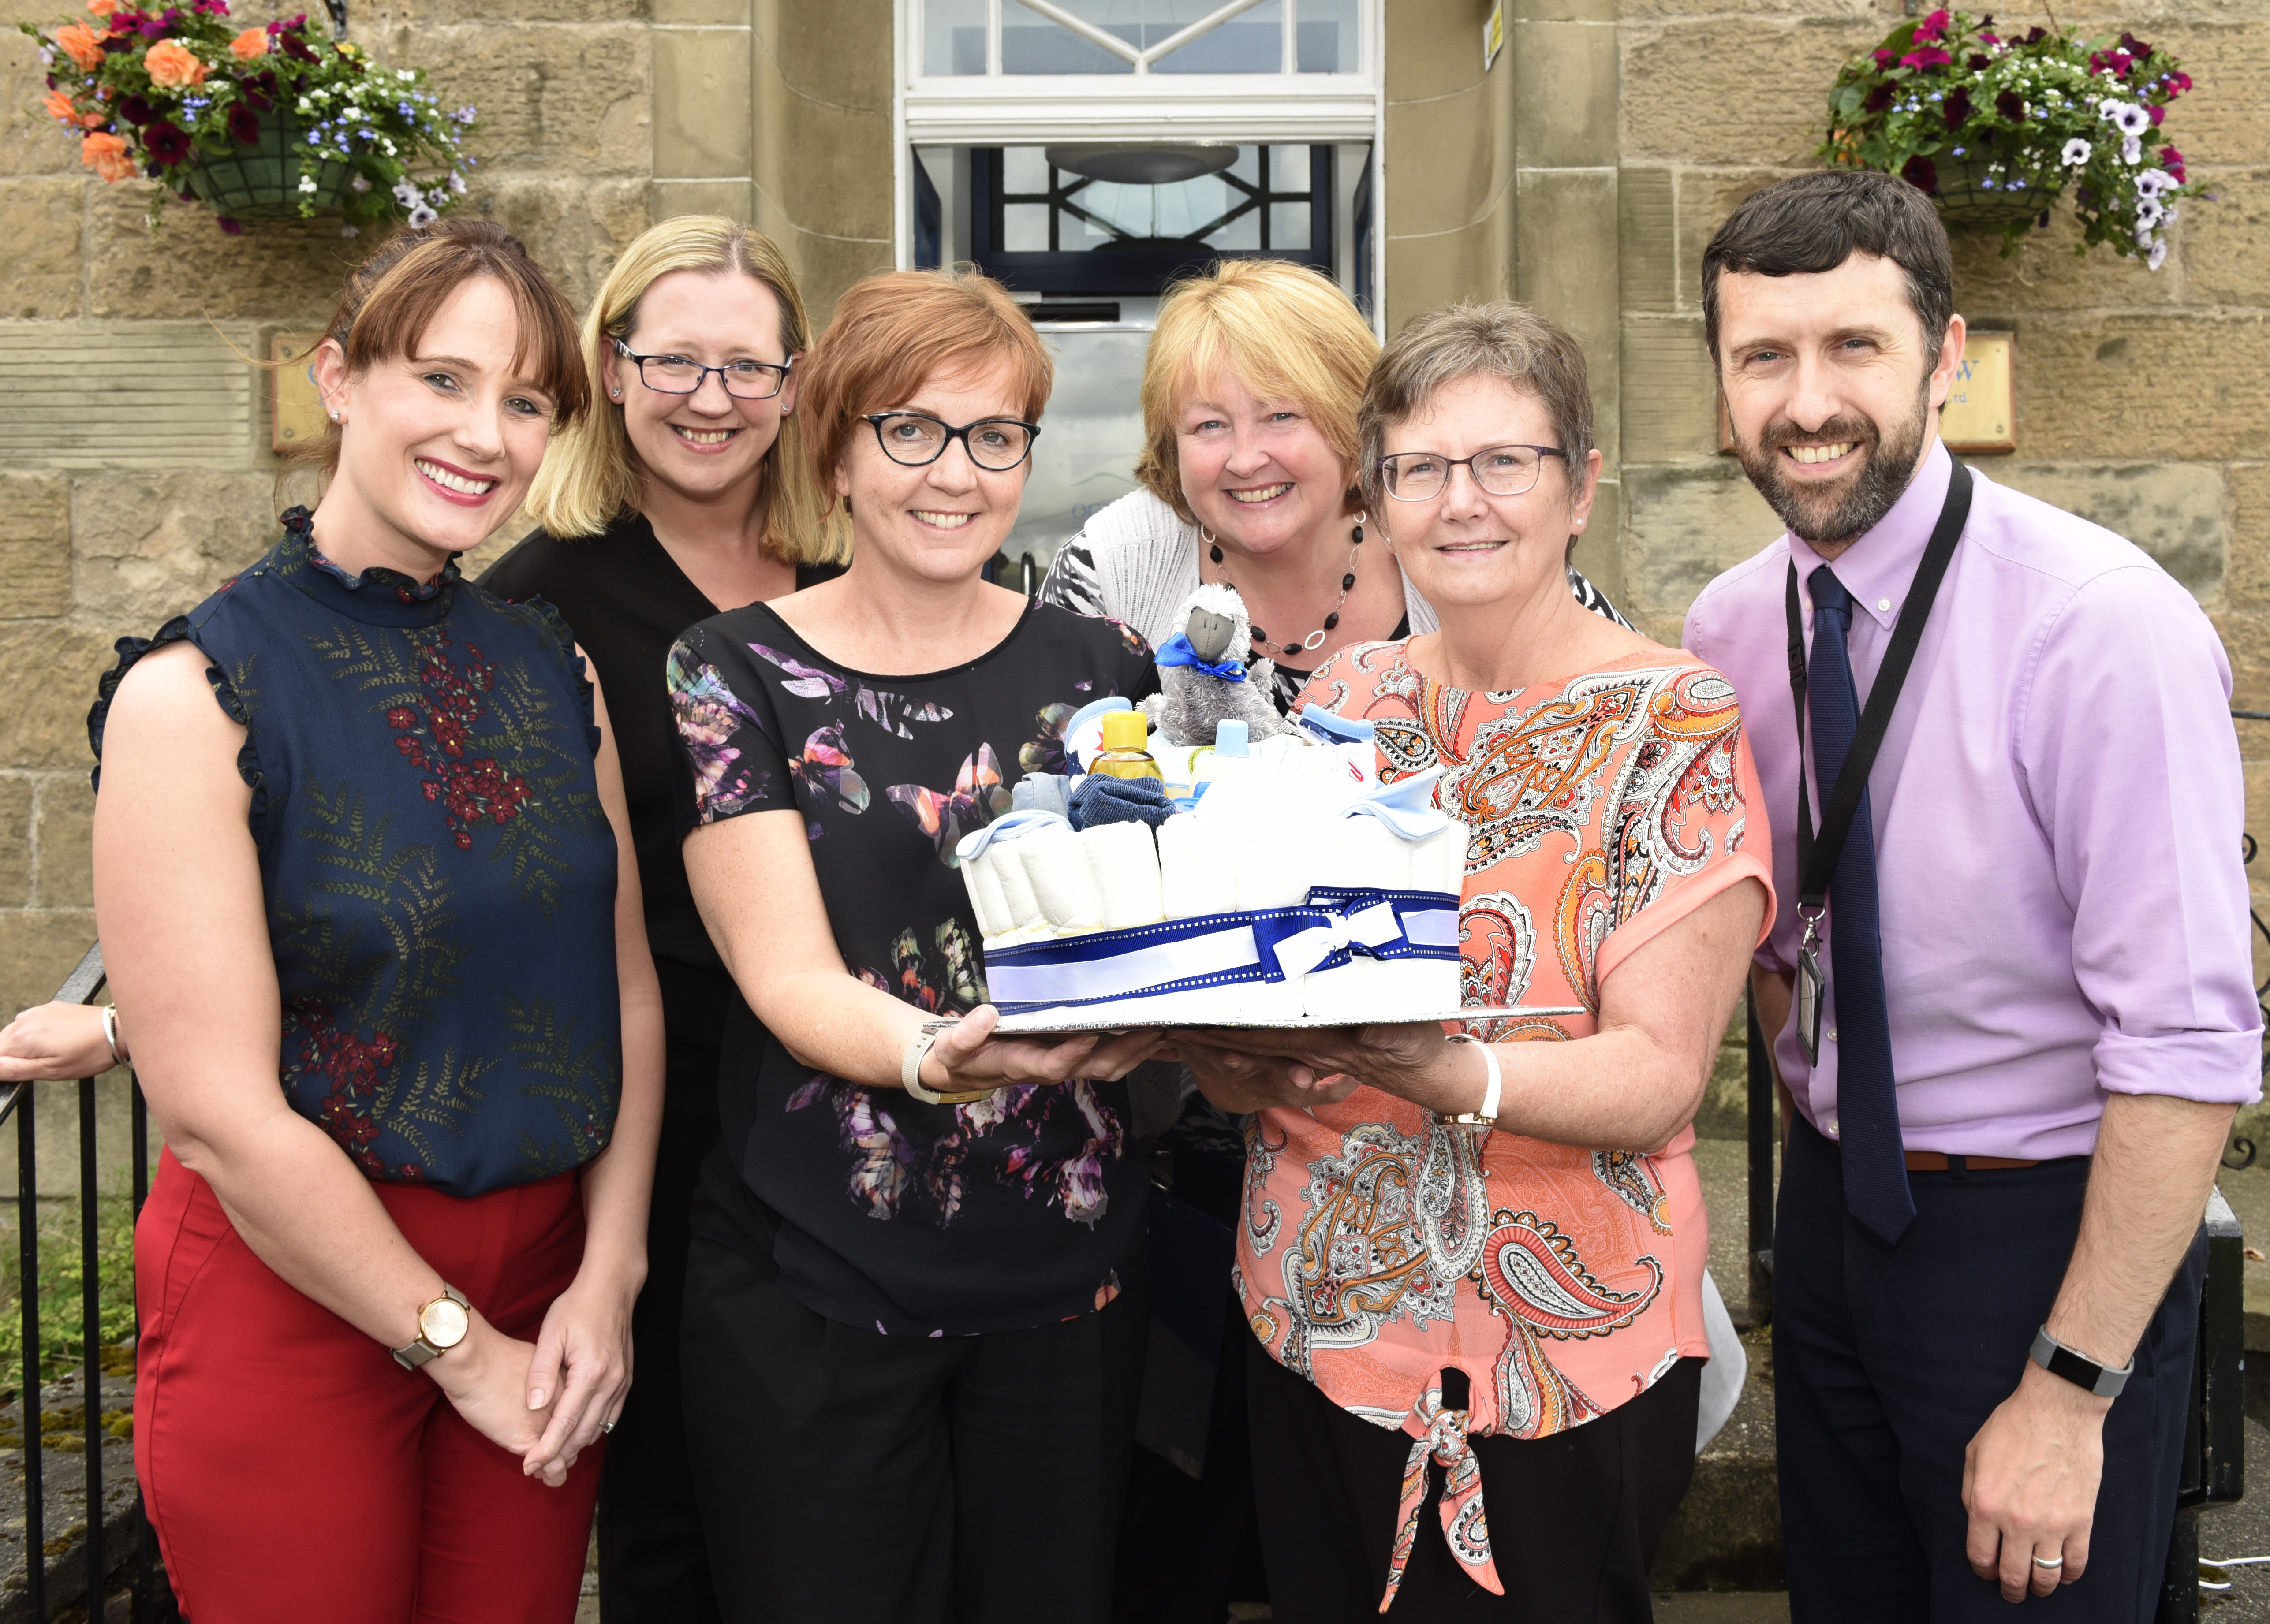 Ochil View celebrates 30th anniversary with prizes, golden tickets and nappy cakes